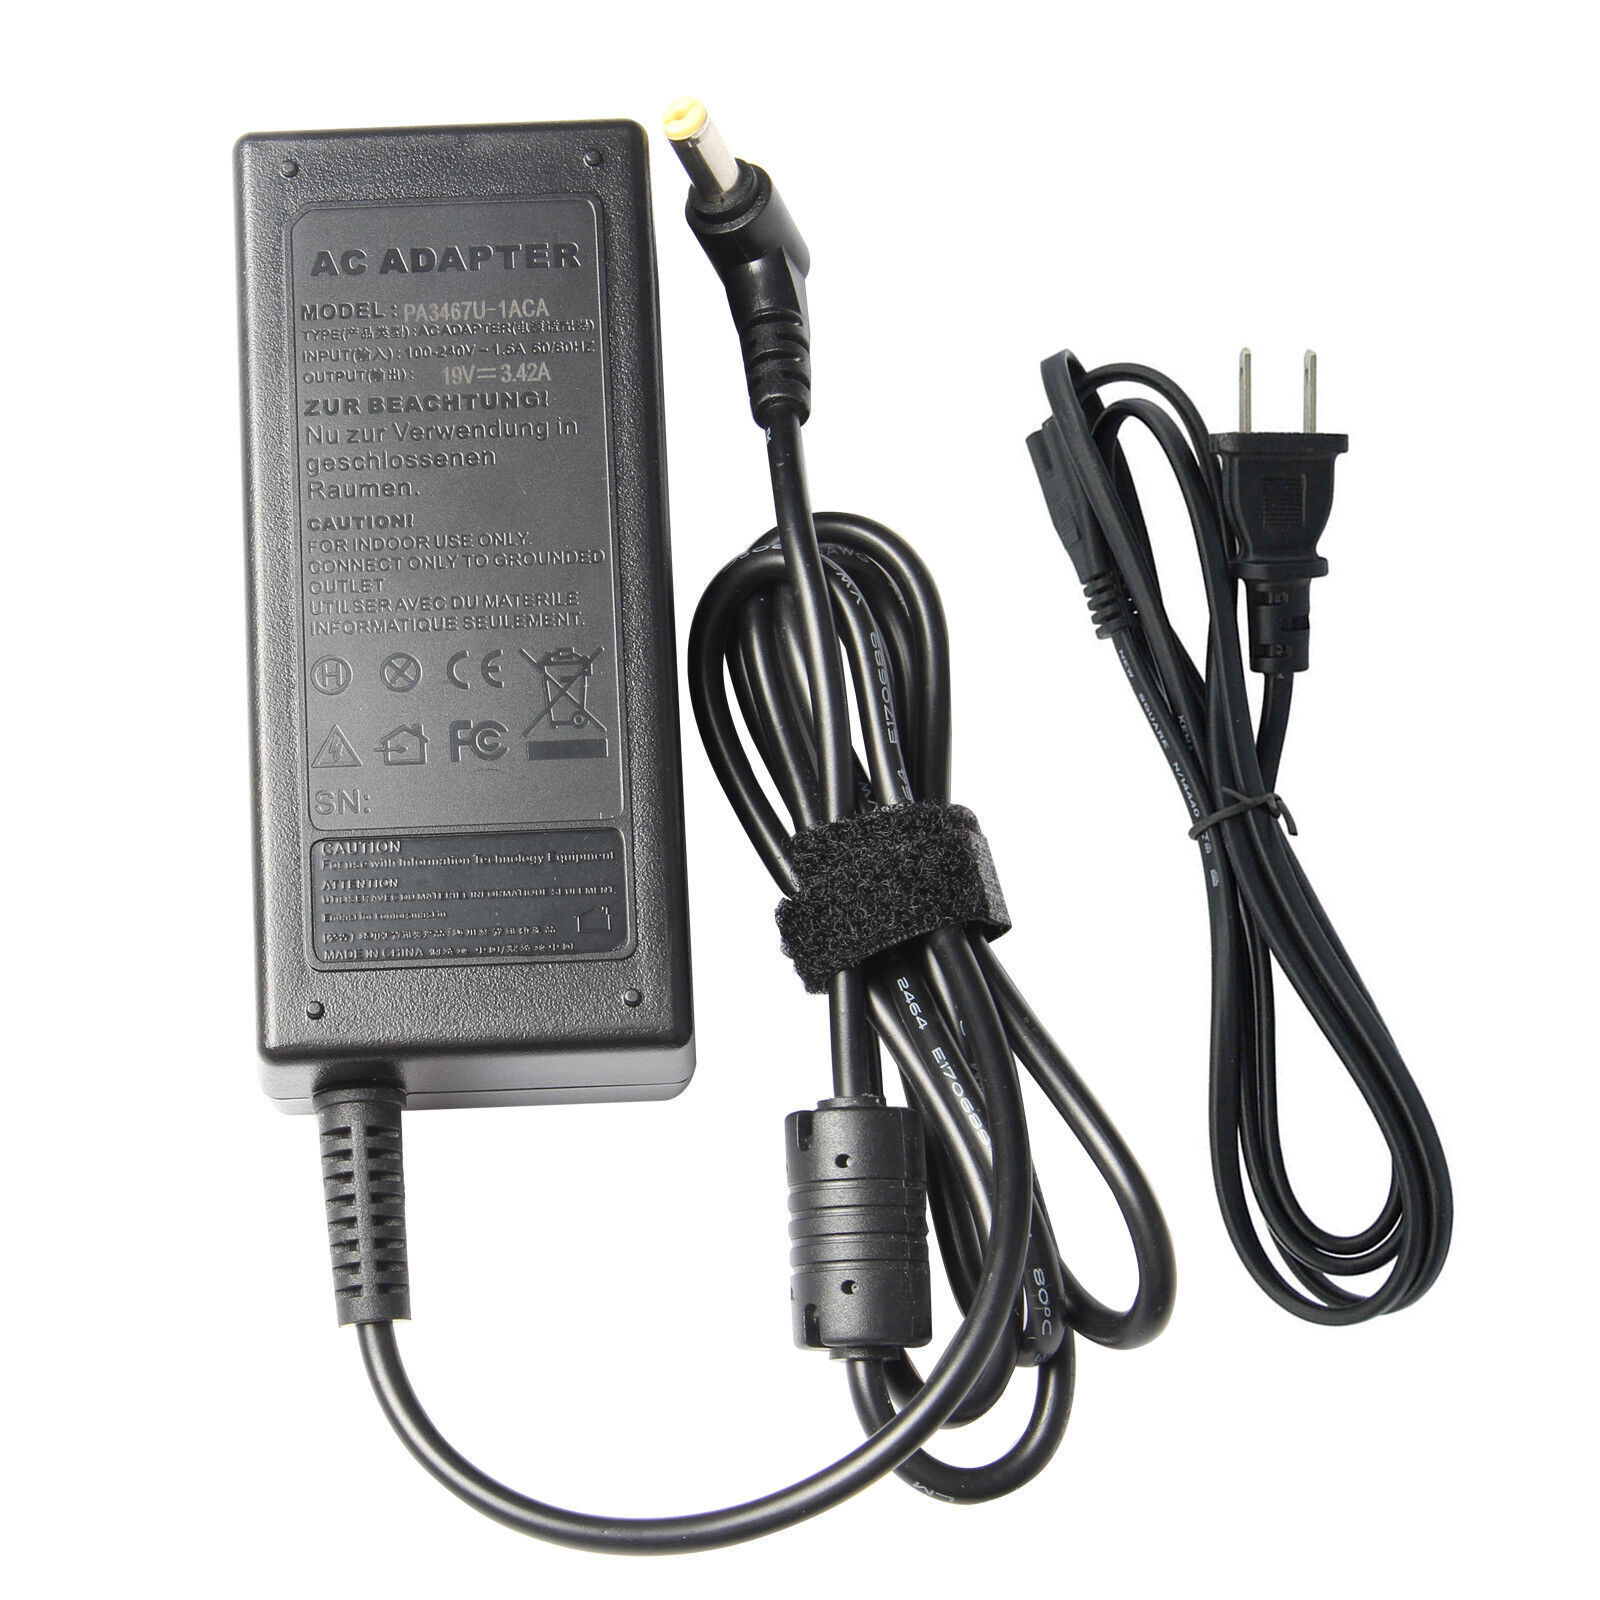 For LITEON Acer Laptop Charger AC Adapter Power Supply PA-1650-86 19V 3.42A